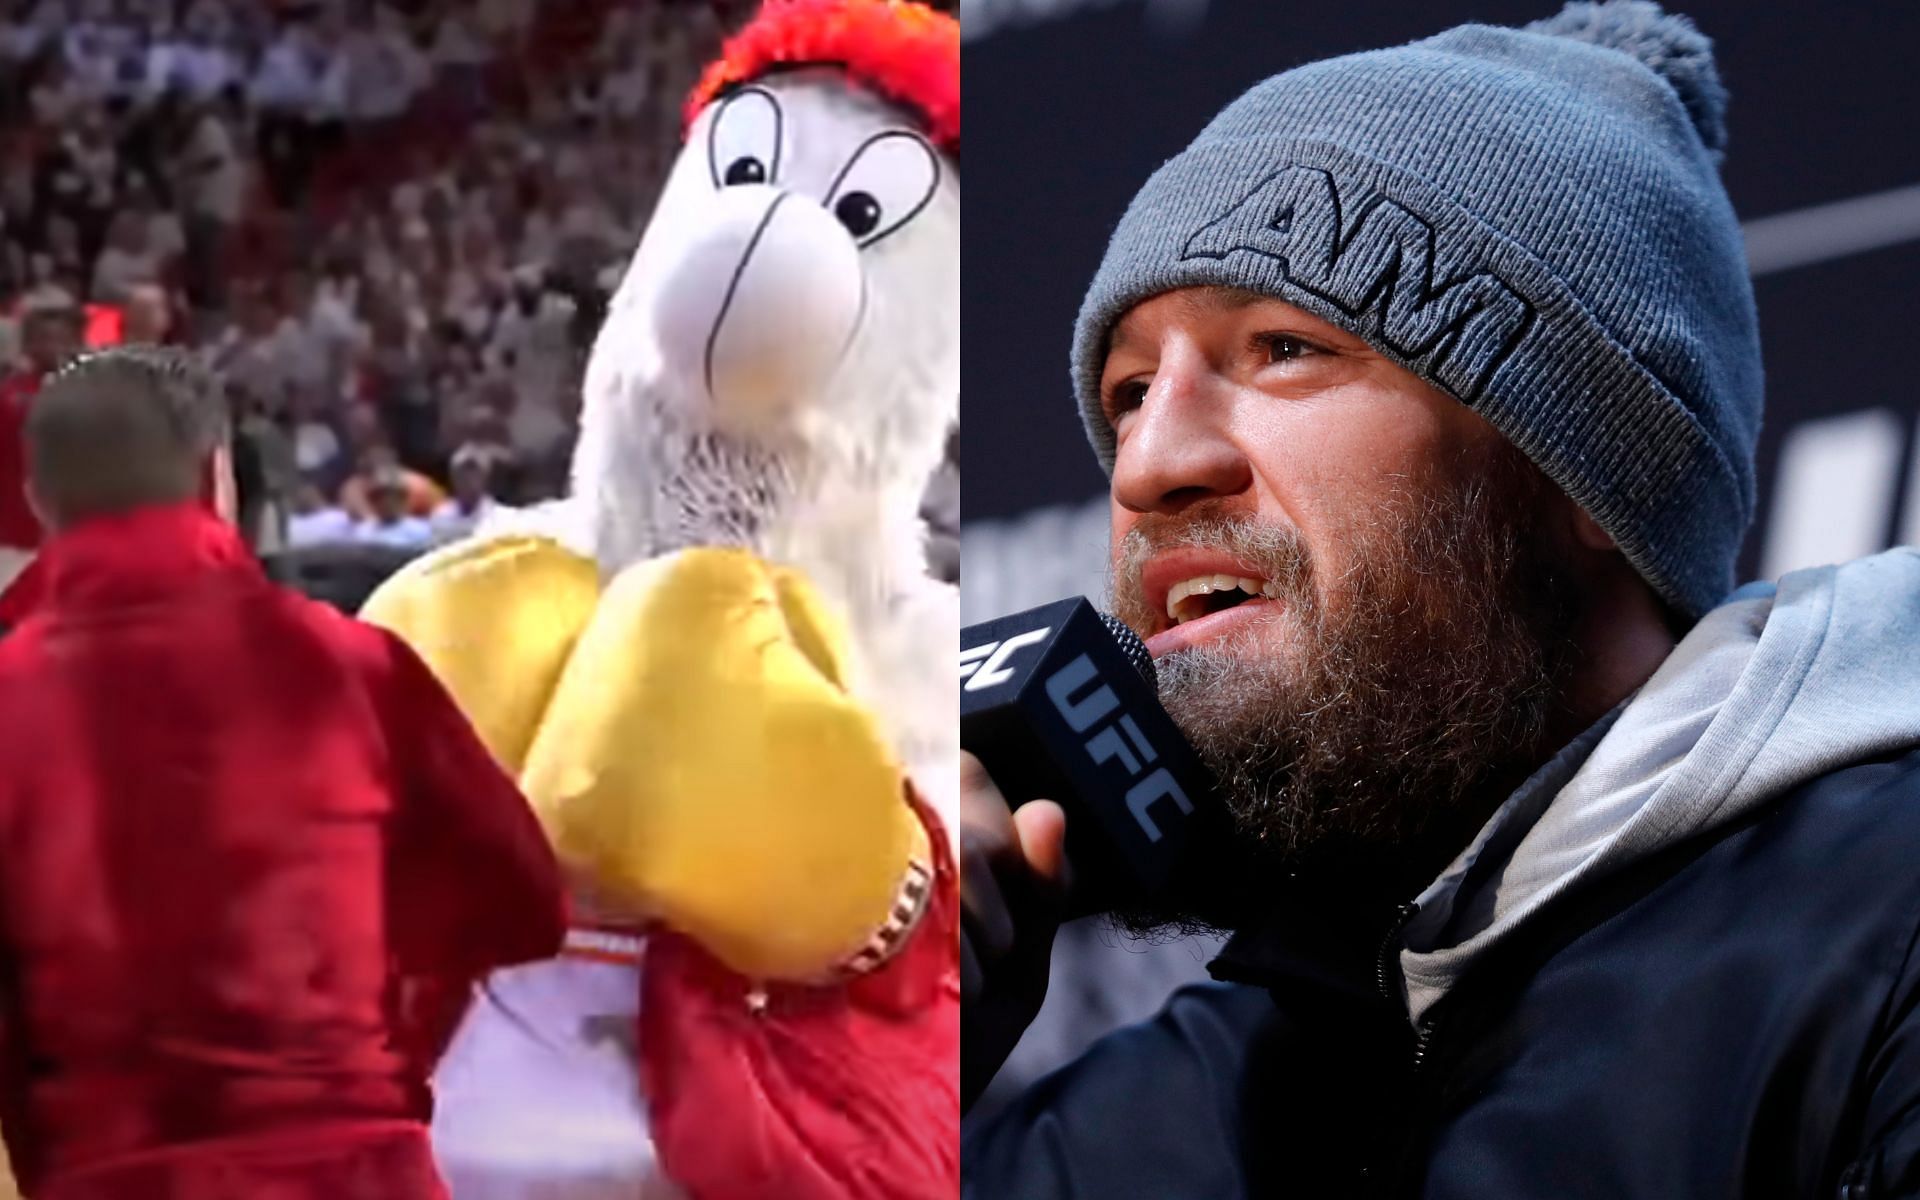 McGregor with the Miami Heat mascot (Left); Conor McGregor (Right) [*Image courtesy: left image via Good Morning America YouTube channel; right image via Getty Images]